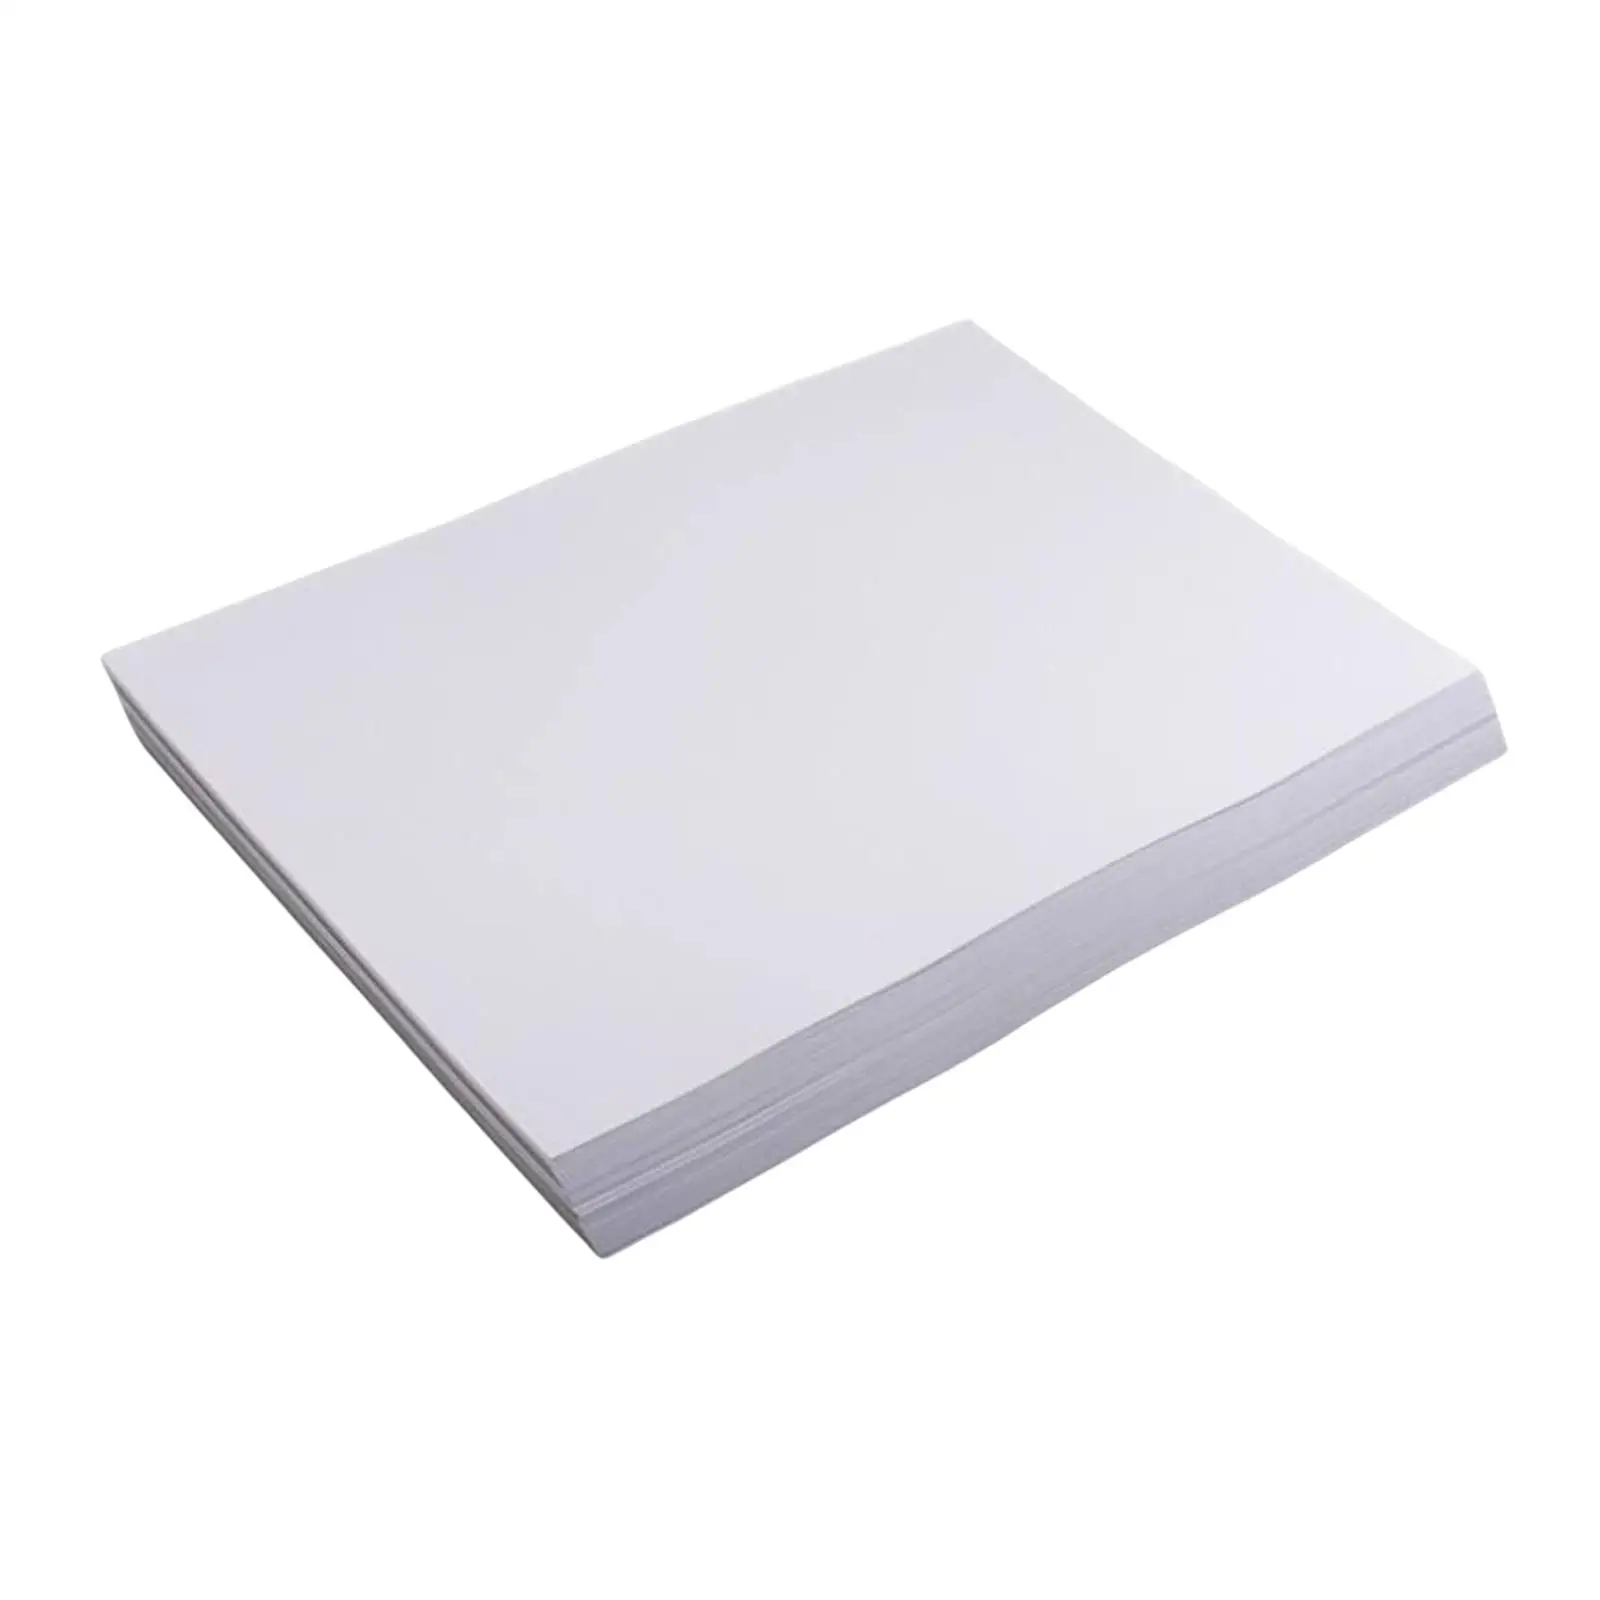 20 Sheets Art Drawing Paper Sketching Paper Blank White Tracing Paper for Artists Children Tracing Animation Printing images - 6